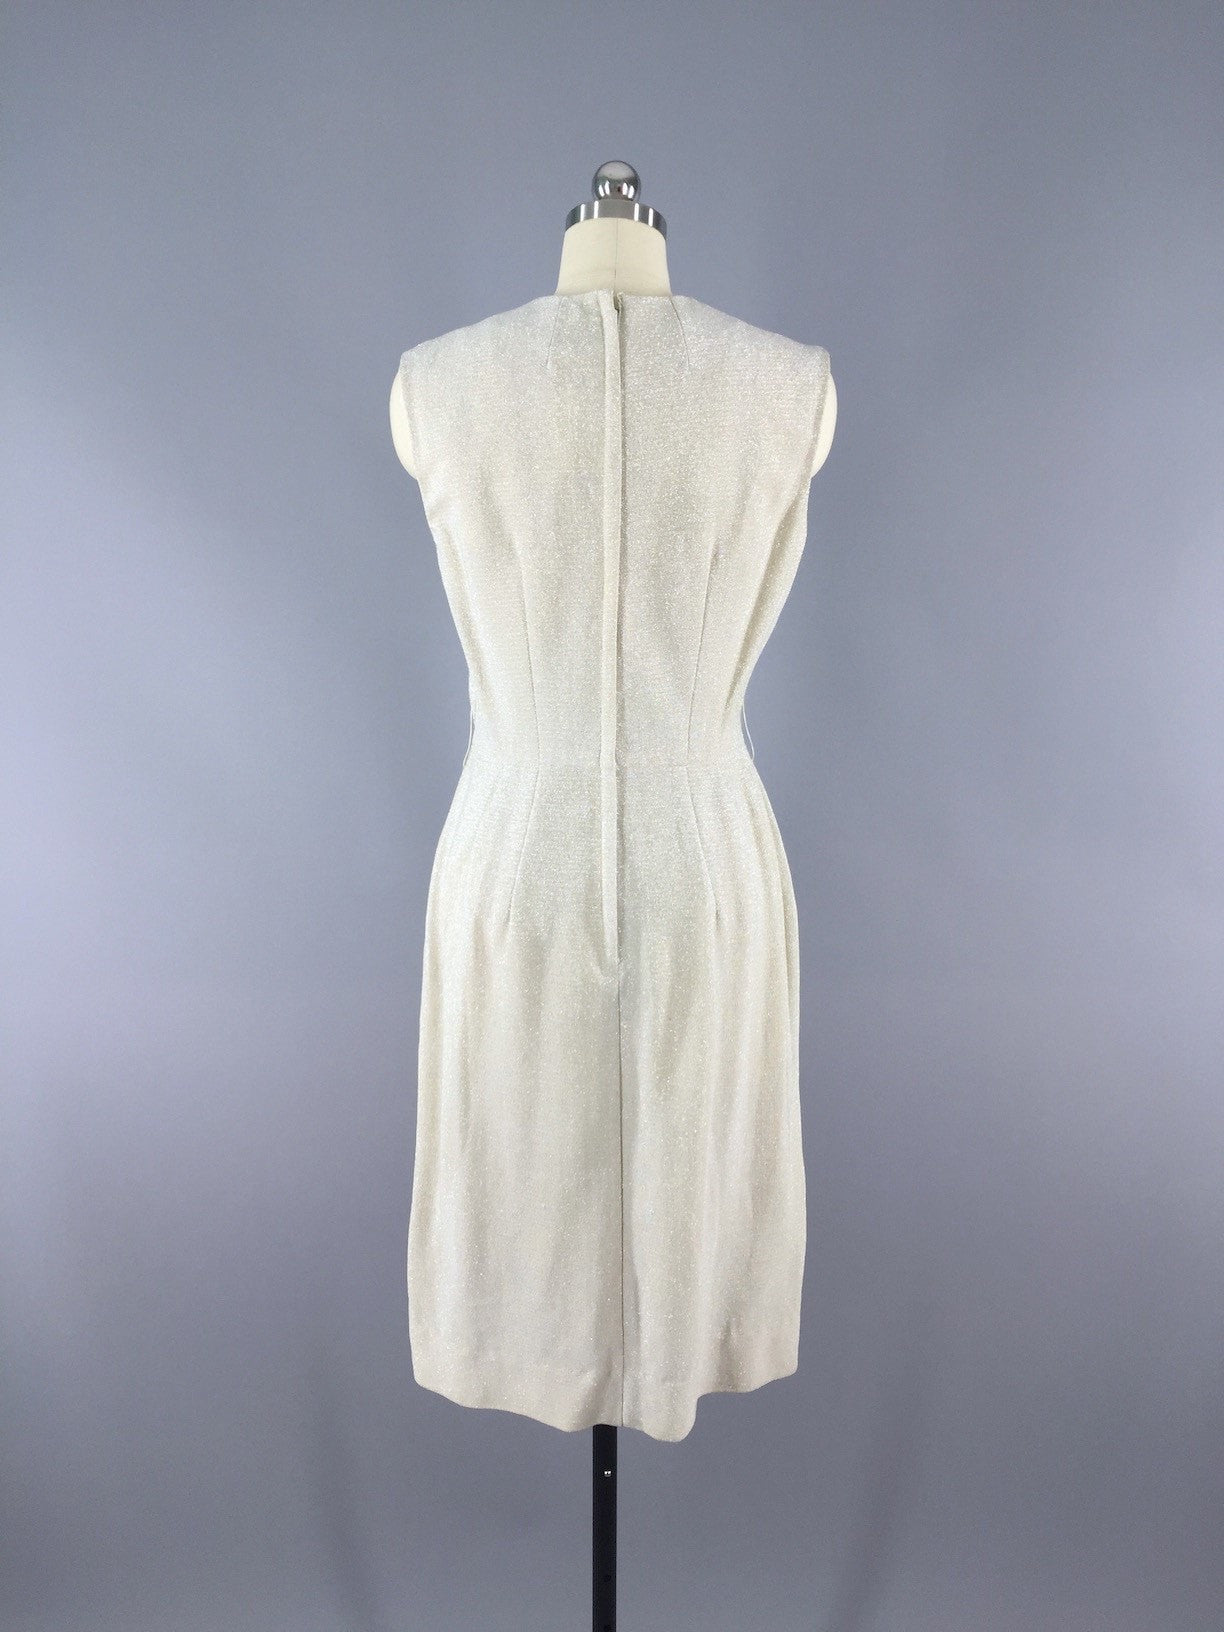 Vintage 1960s Silver Gold Dress - ThisBlueBird